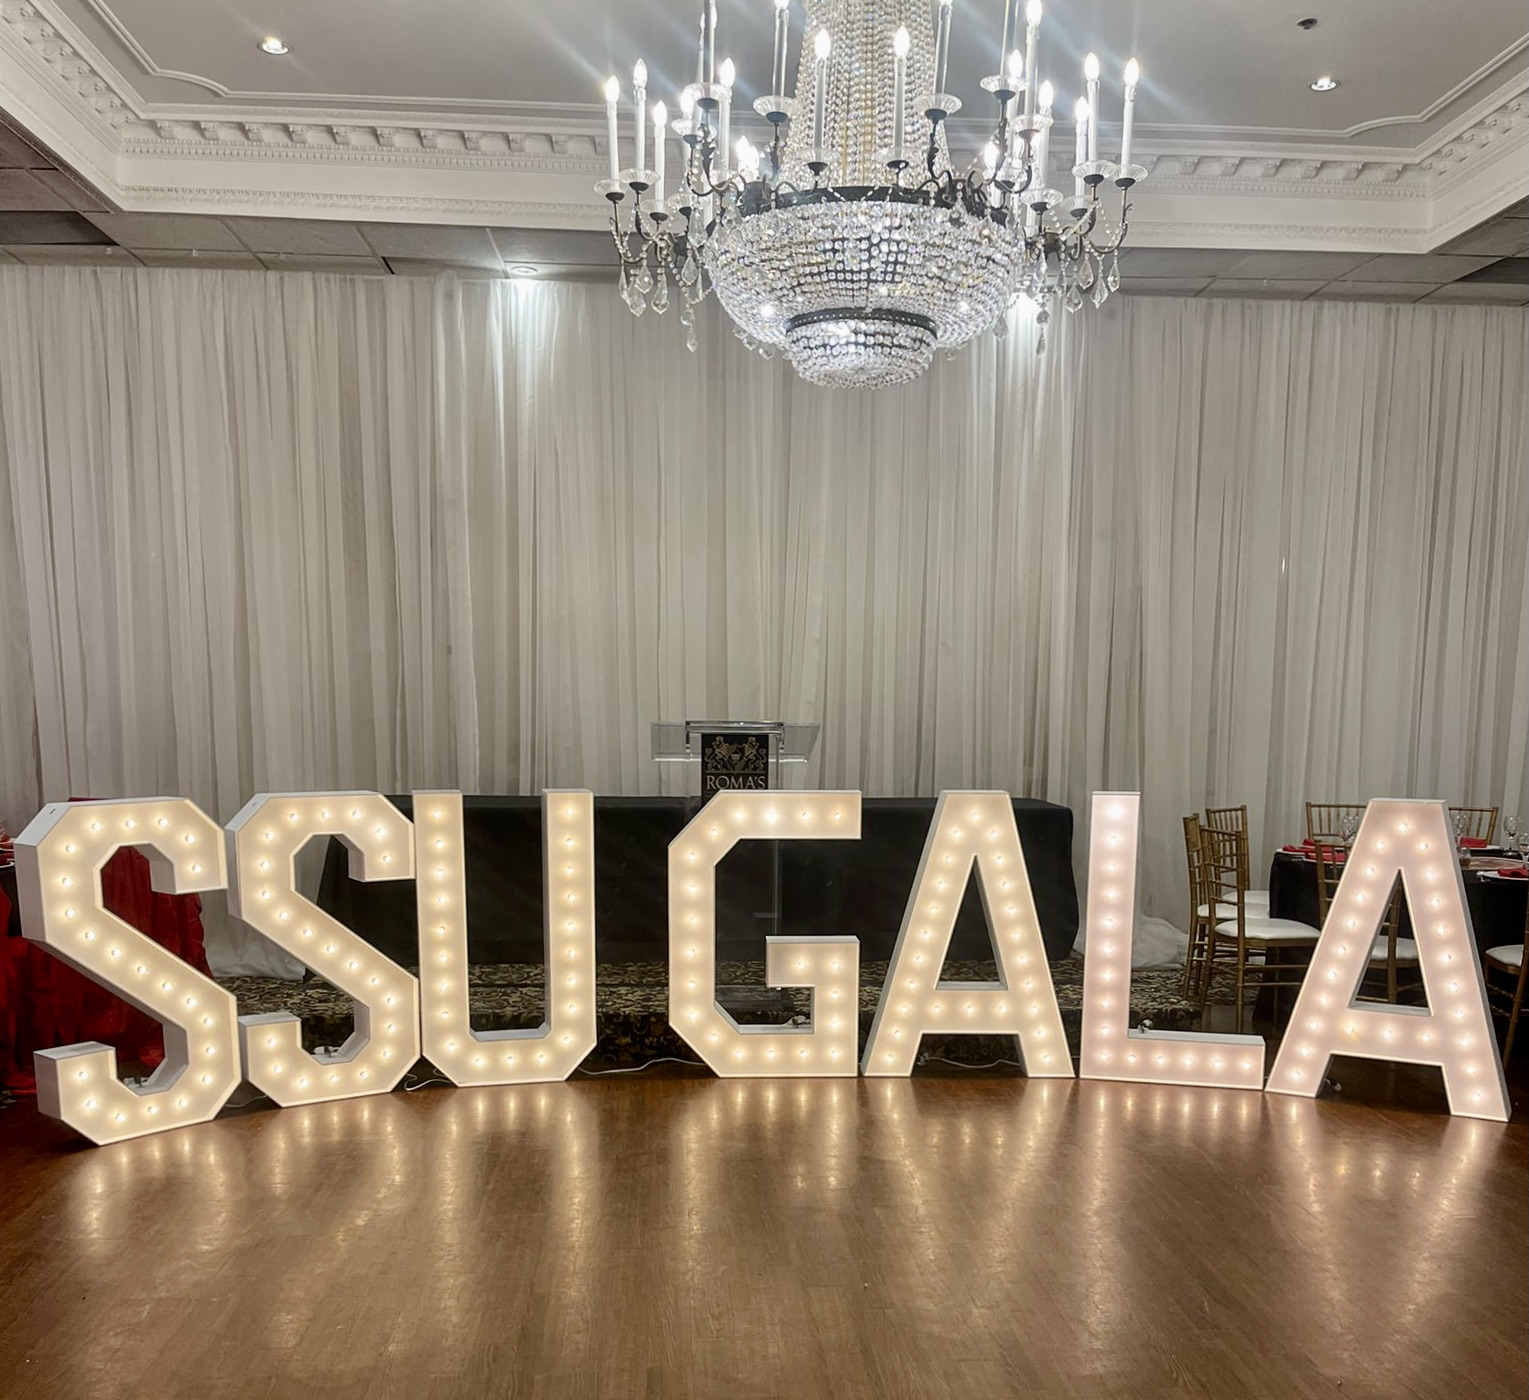 Chatham corporate marquee letters